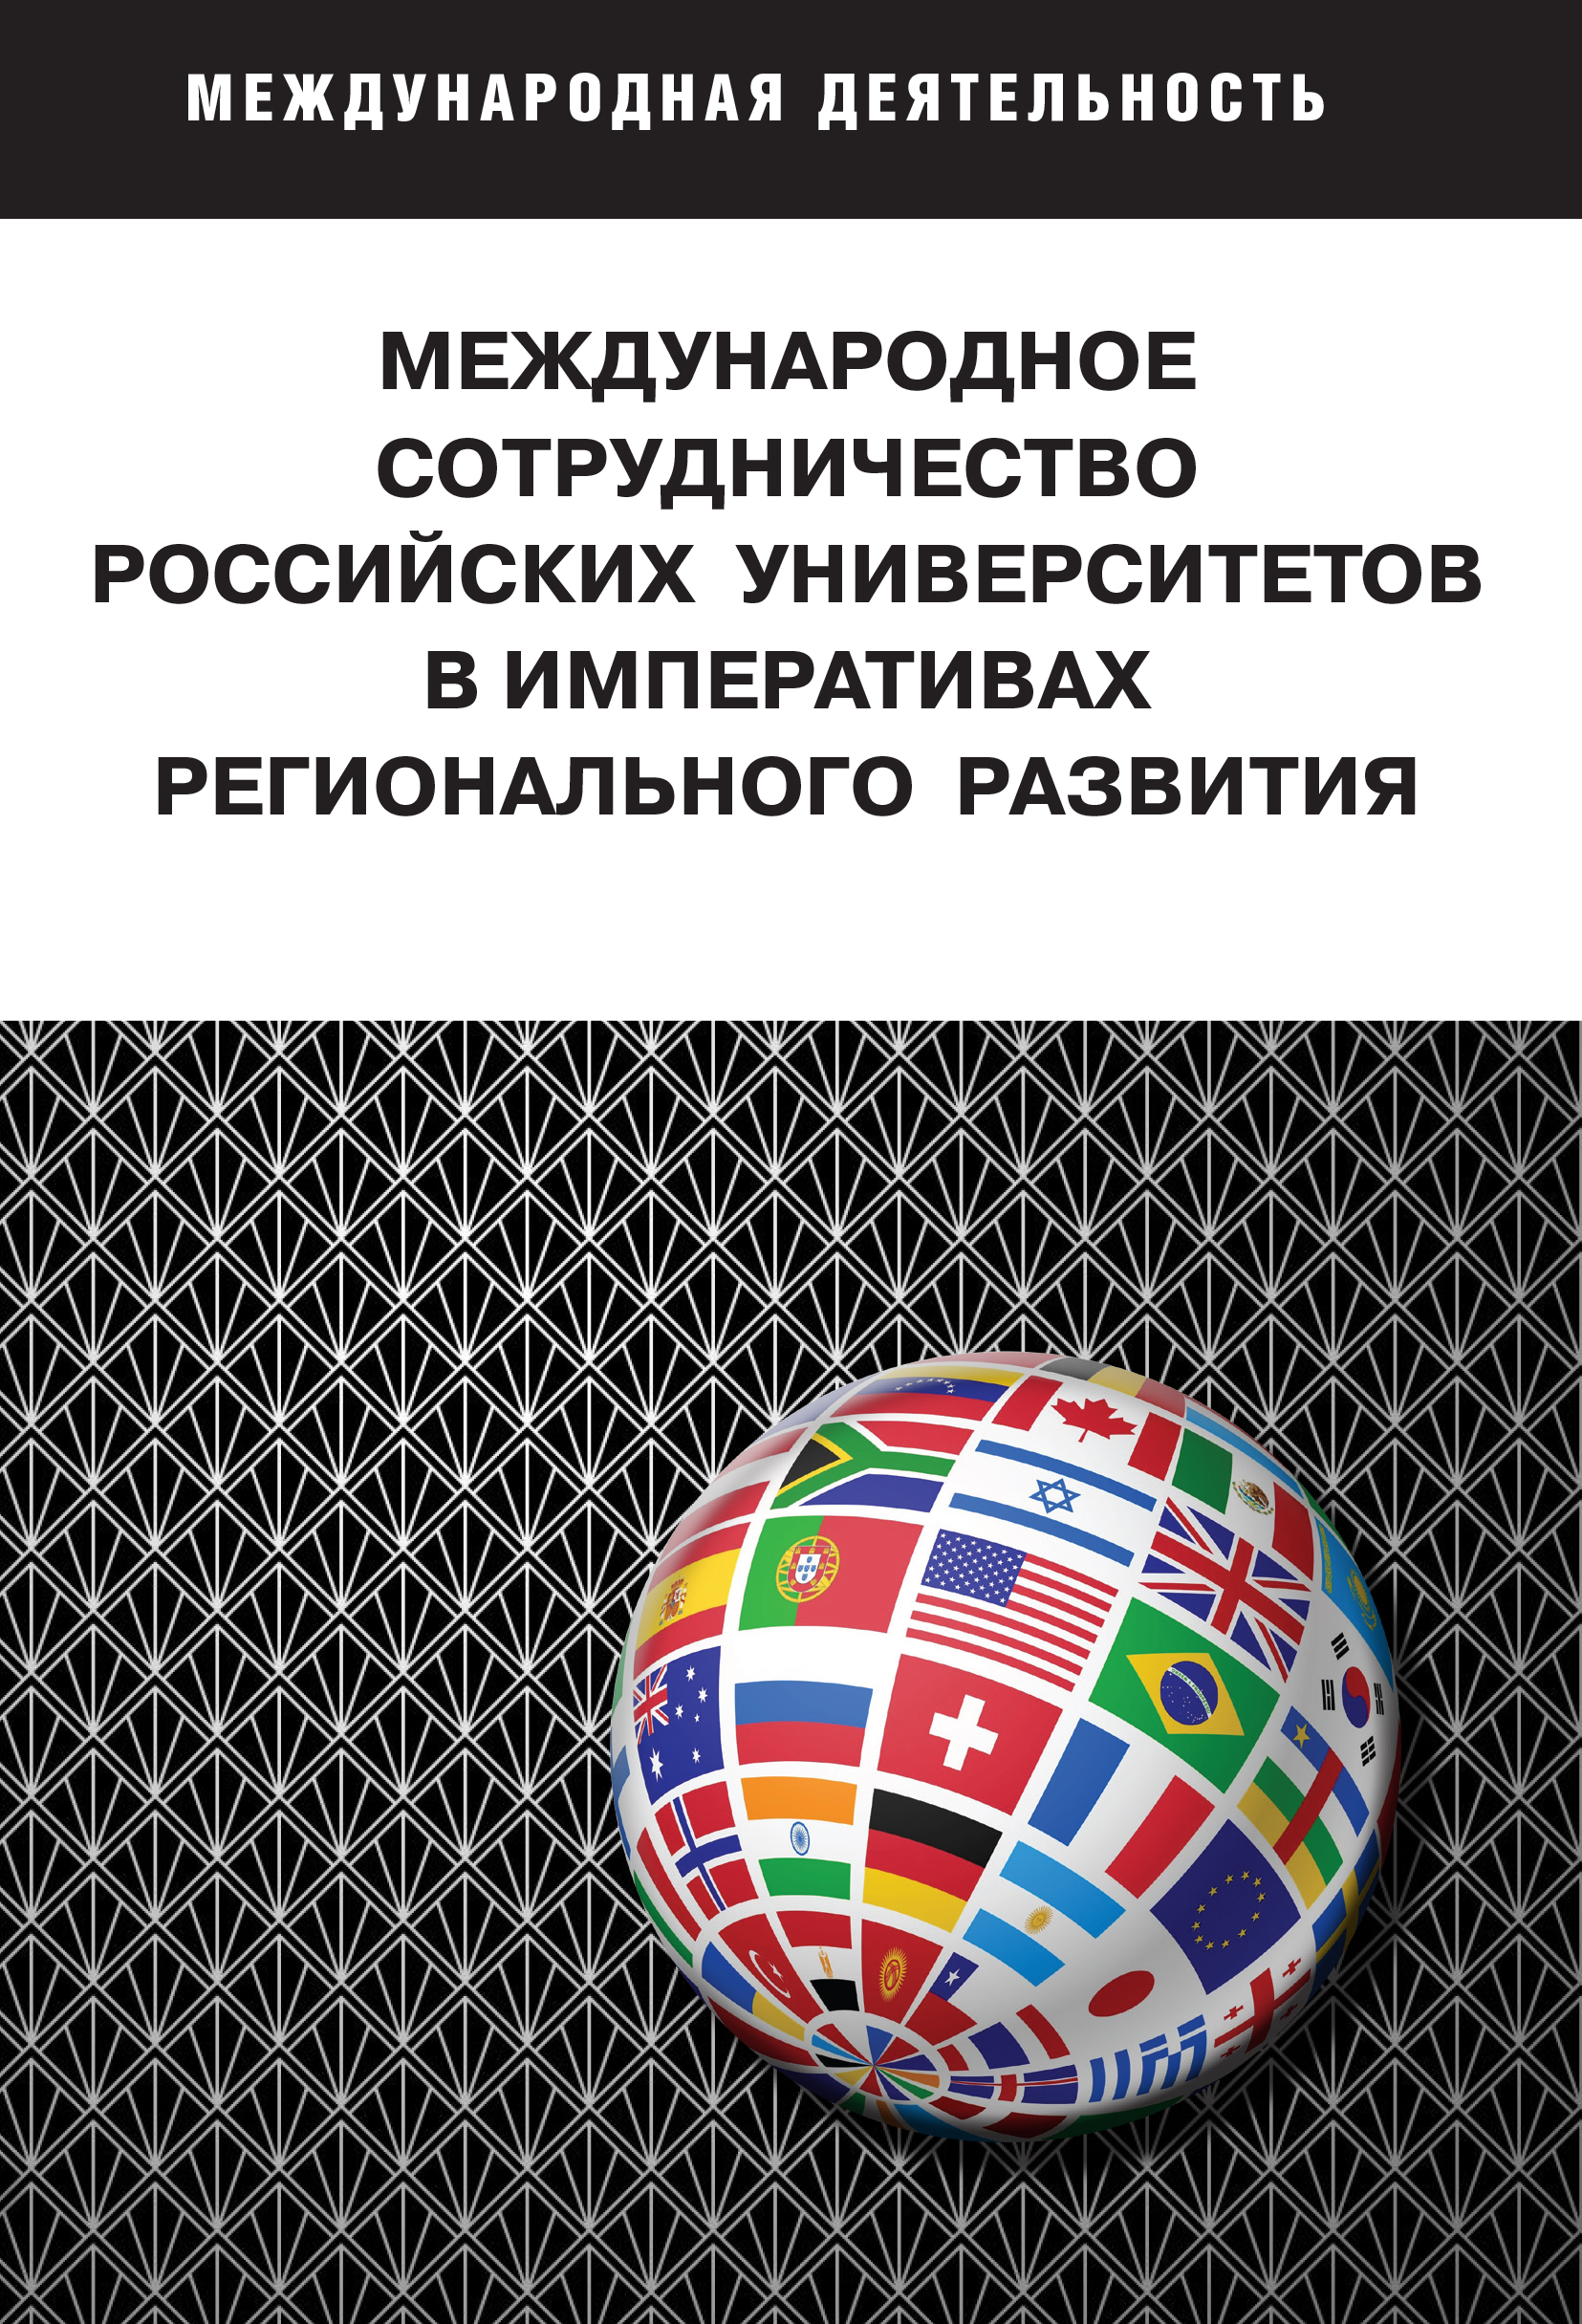                         International cooperation of Russian universities in the imperatives of regional development
            